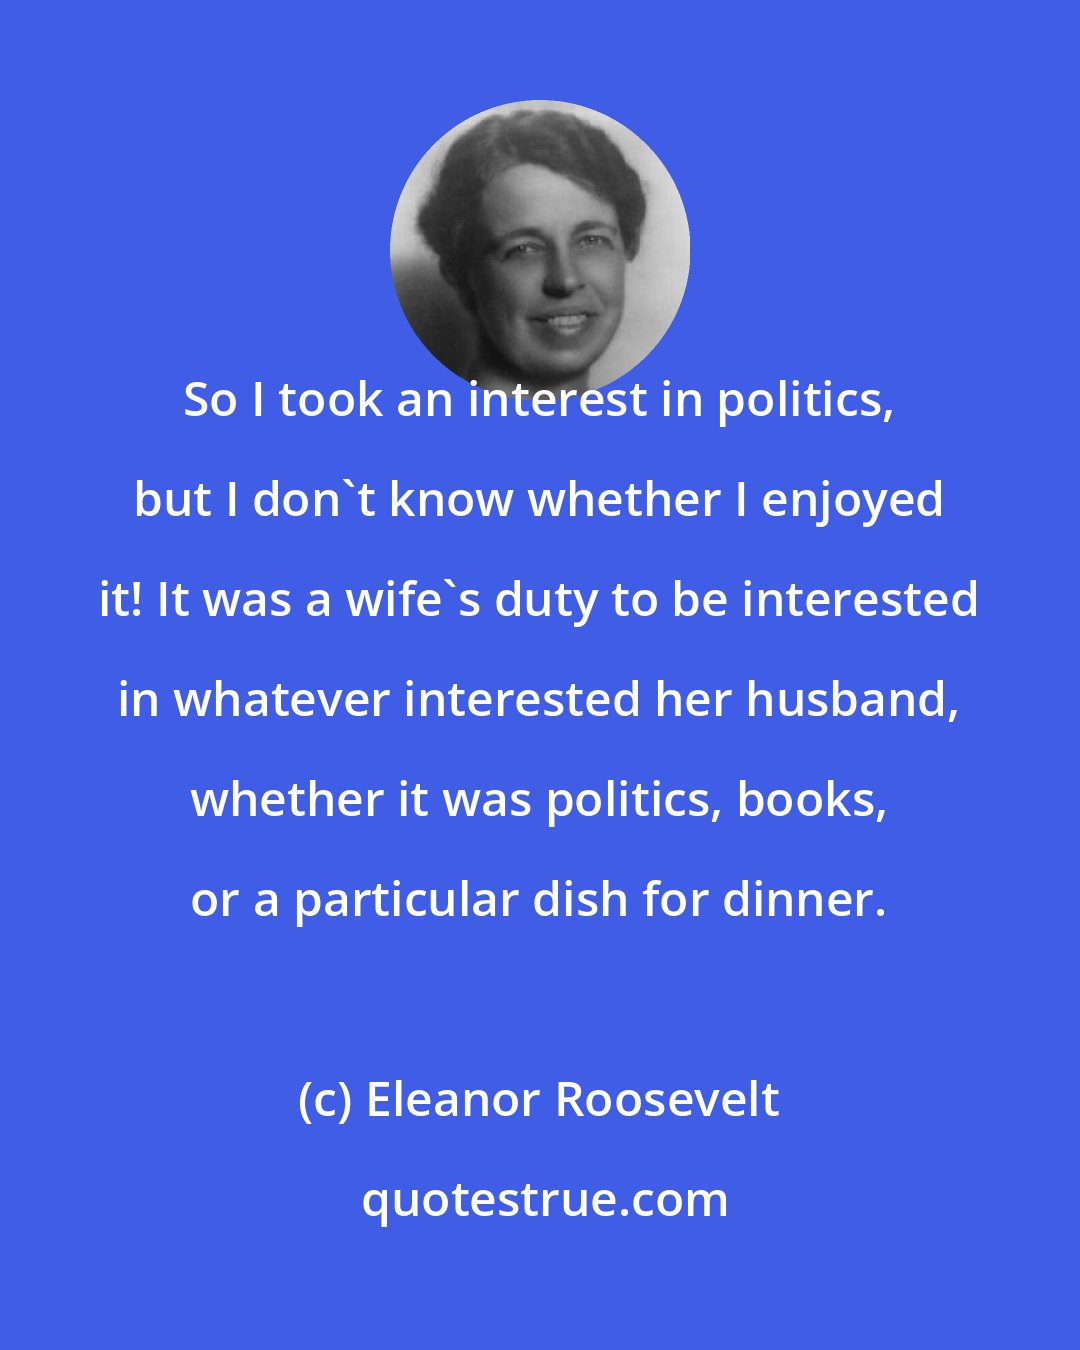 Eleanor Roosevelt: So I took an interest in politics, but I don't know whether I enjoyed it! It was a wife's duty to be interested in whatever interested her husband, whether it was politics, books, or a particular dish for dinner.